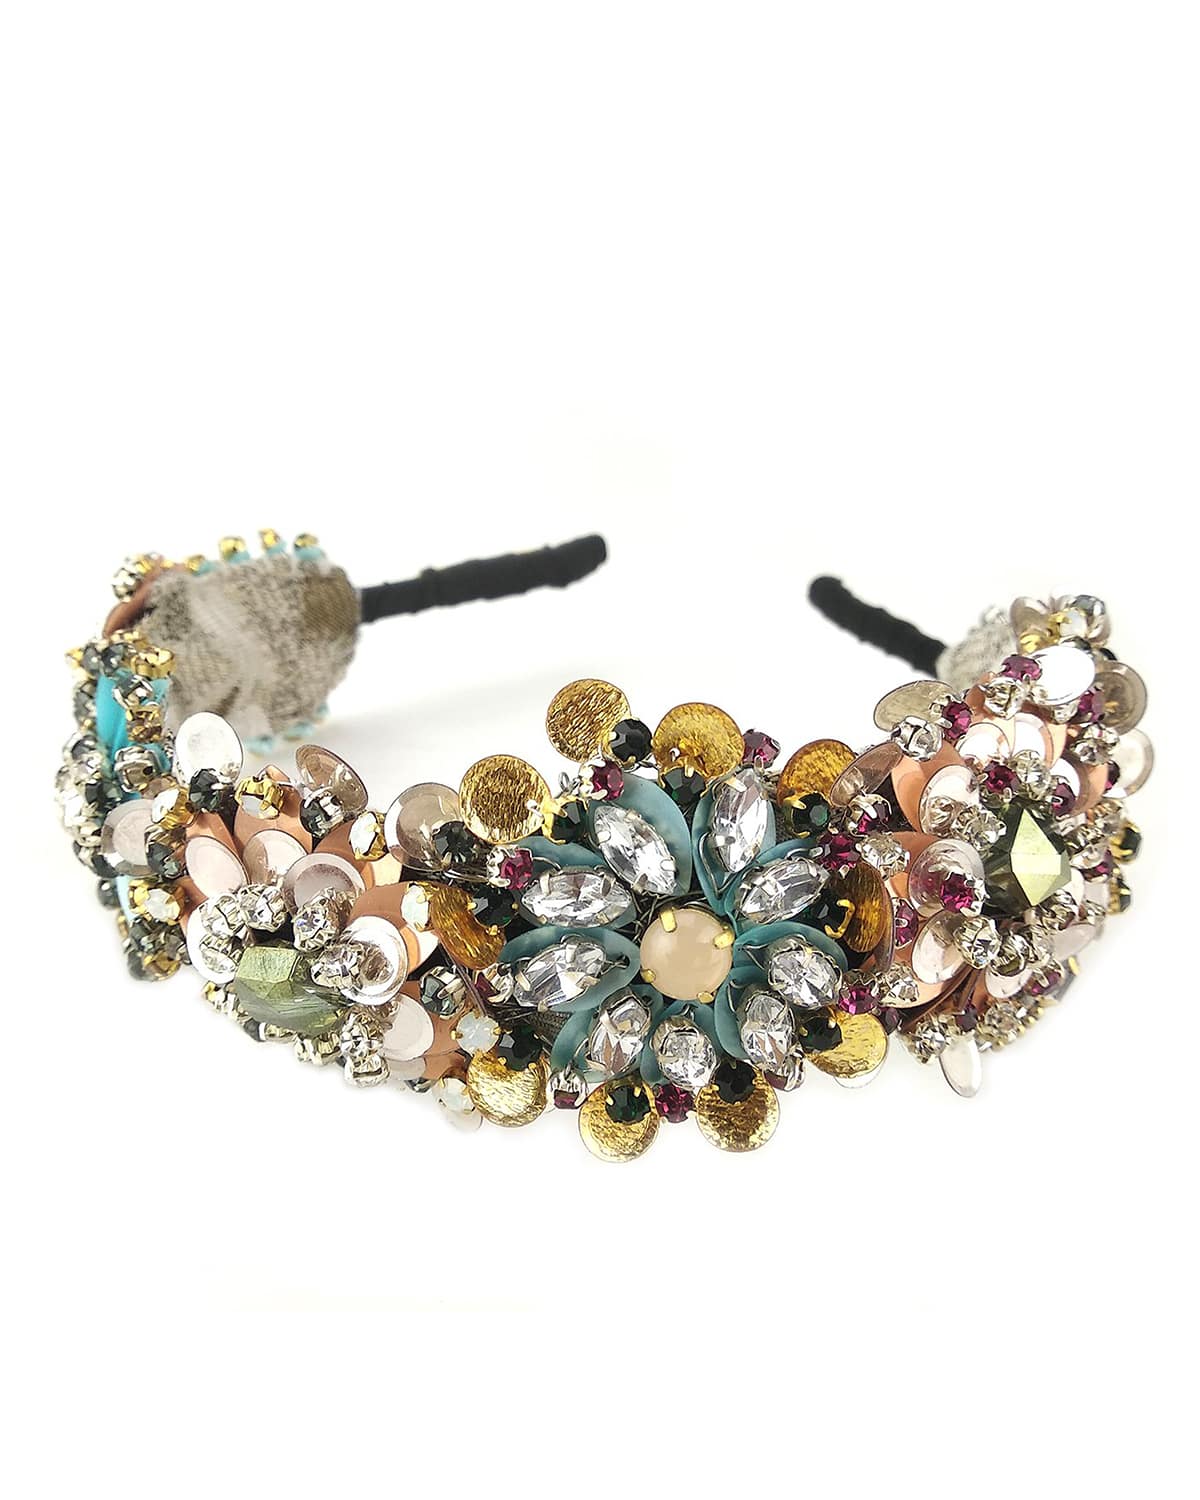 Multicolor Crystals, Sequins, Beads and fabric Embellished floral partywear Hairband